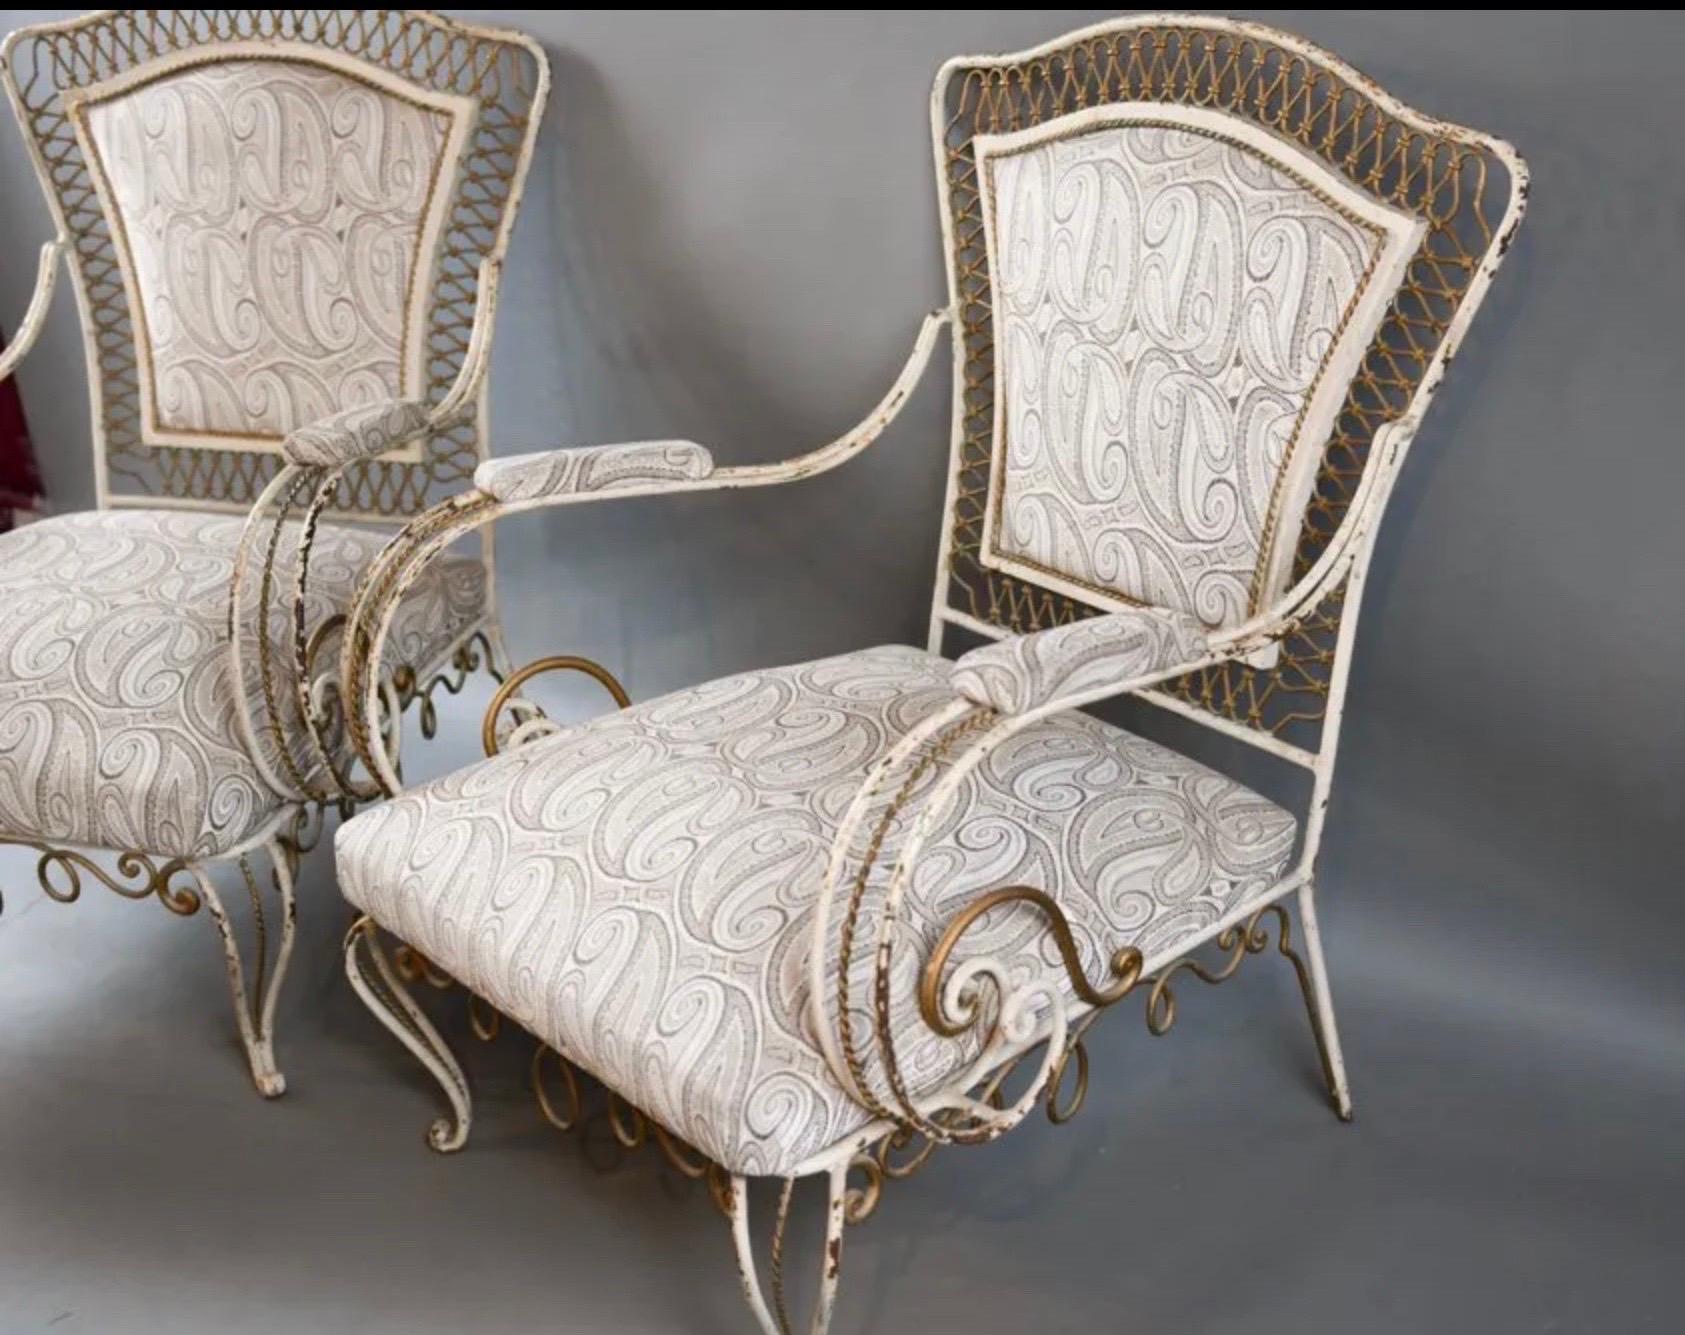 Beautiful pair of Rene Prou Style armchair, circa 1940s.
Great original patina,superb wrought iron details.
The fabric is not new however in very good condition.